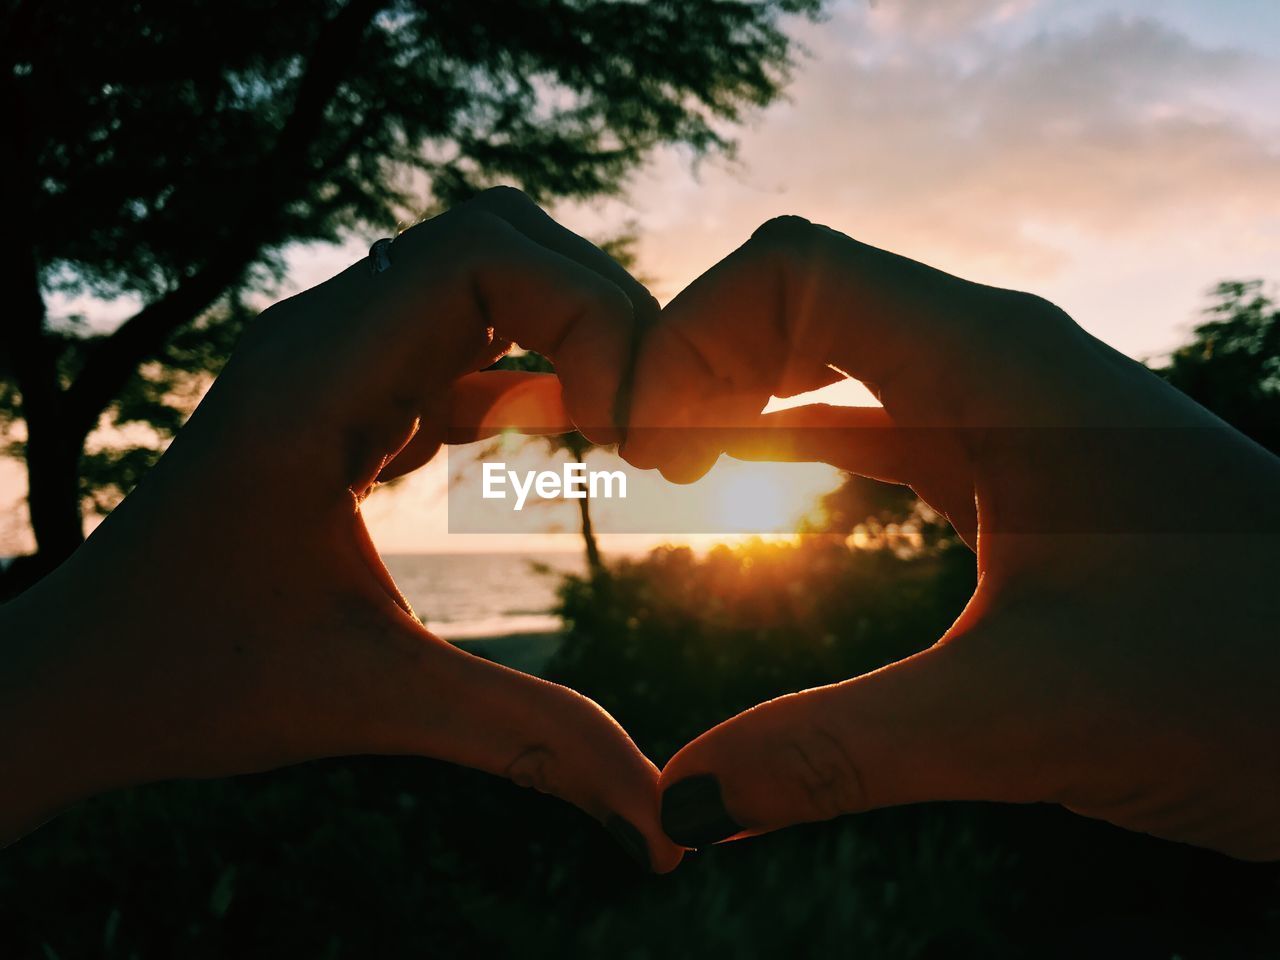 Cropped hands of woman making heart shape against sky during sunset